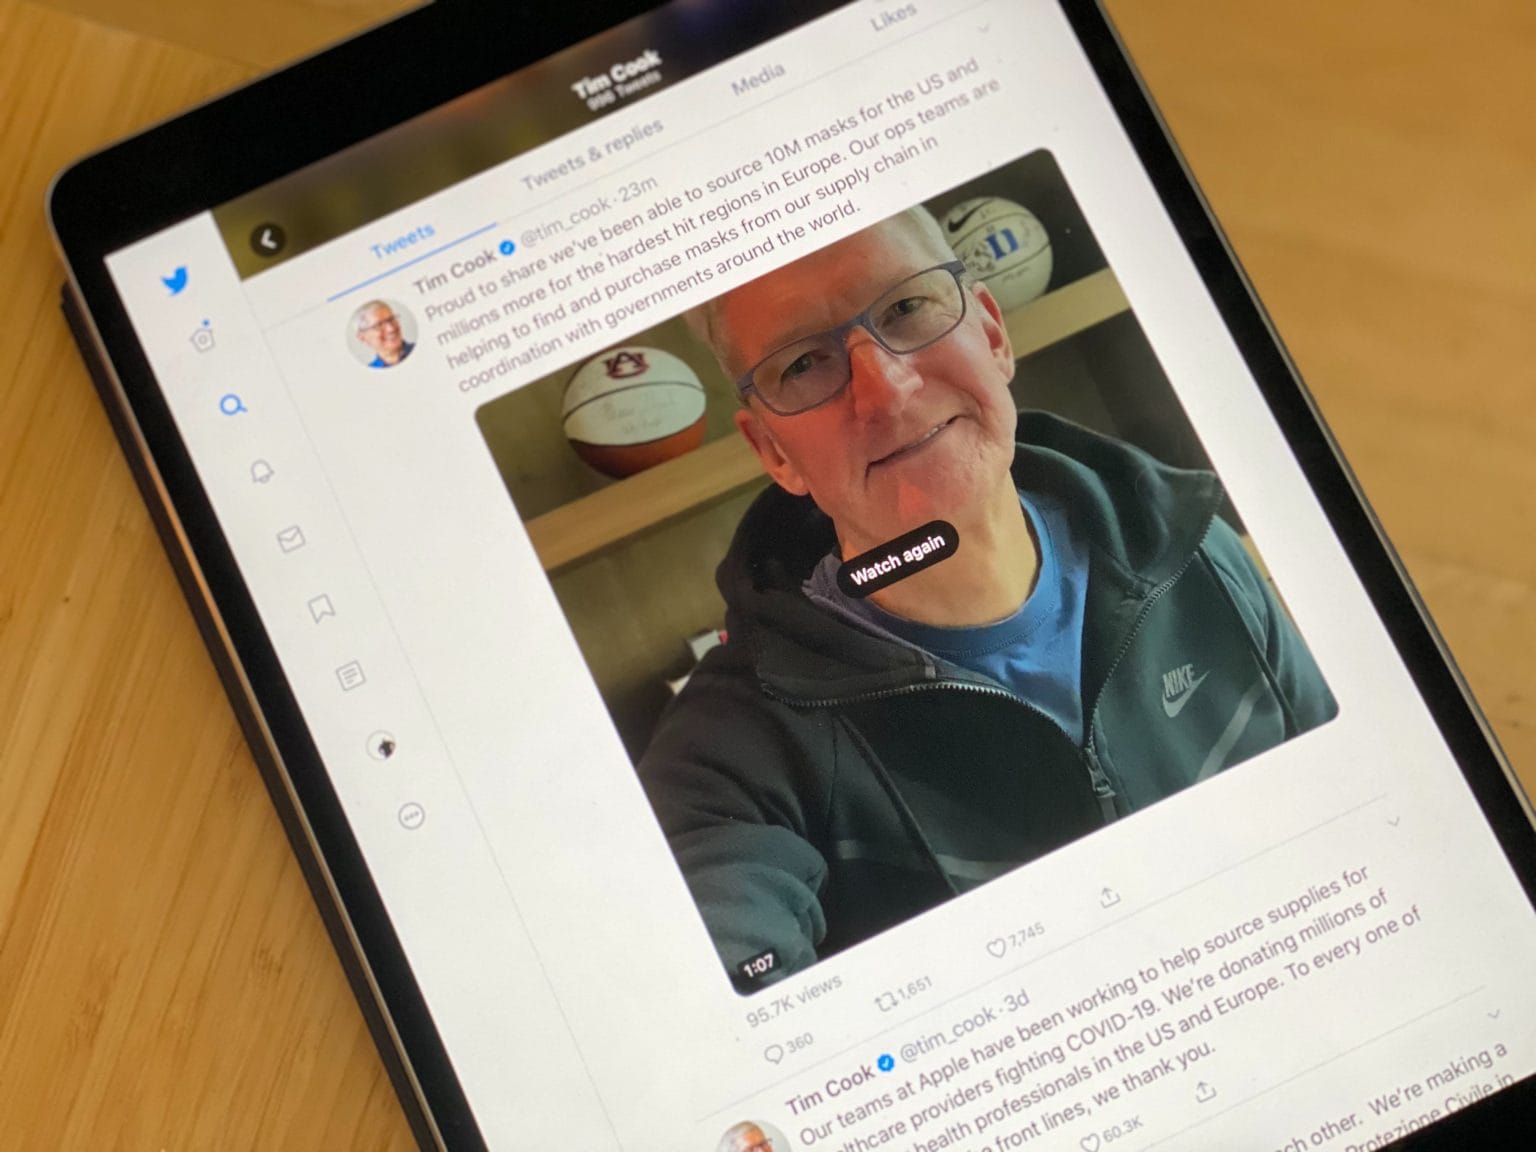 CEO Tim Cook hops on Twitter to offer some coronavirus advice and talk about Apple's mask donations.